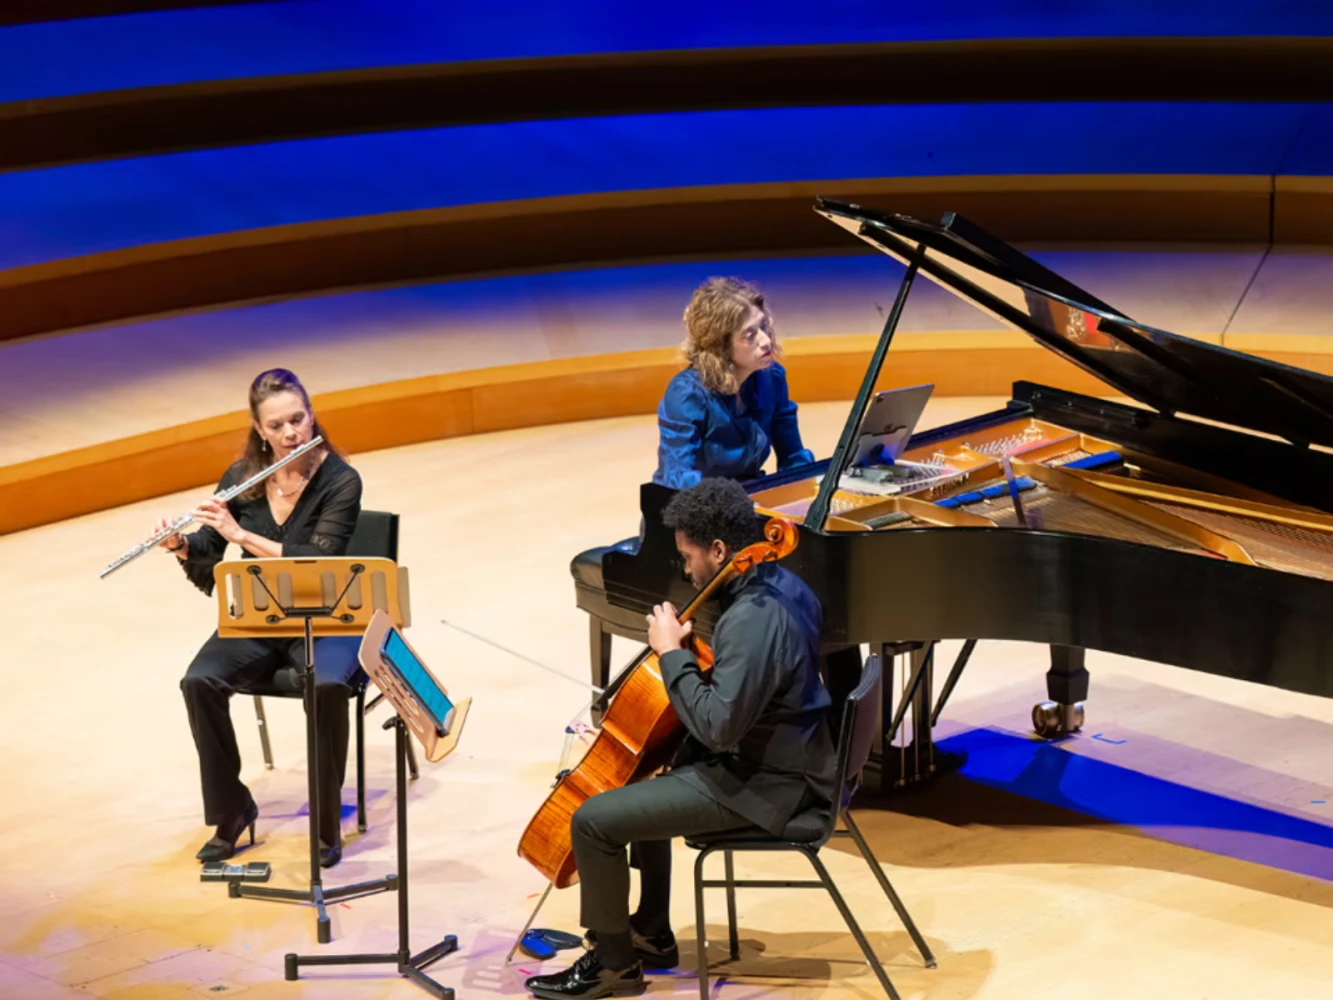 LA Phil's Chamber Music and Wine: April 2 Schubert’s Octet: What to expect - 2